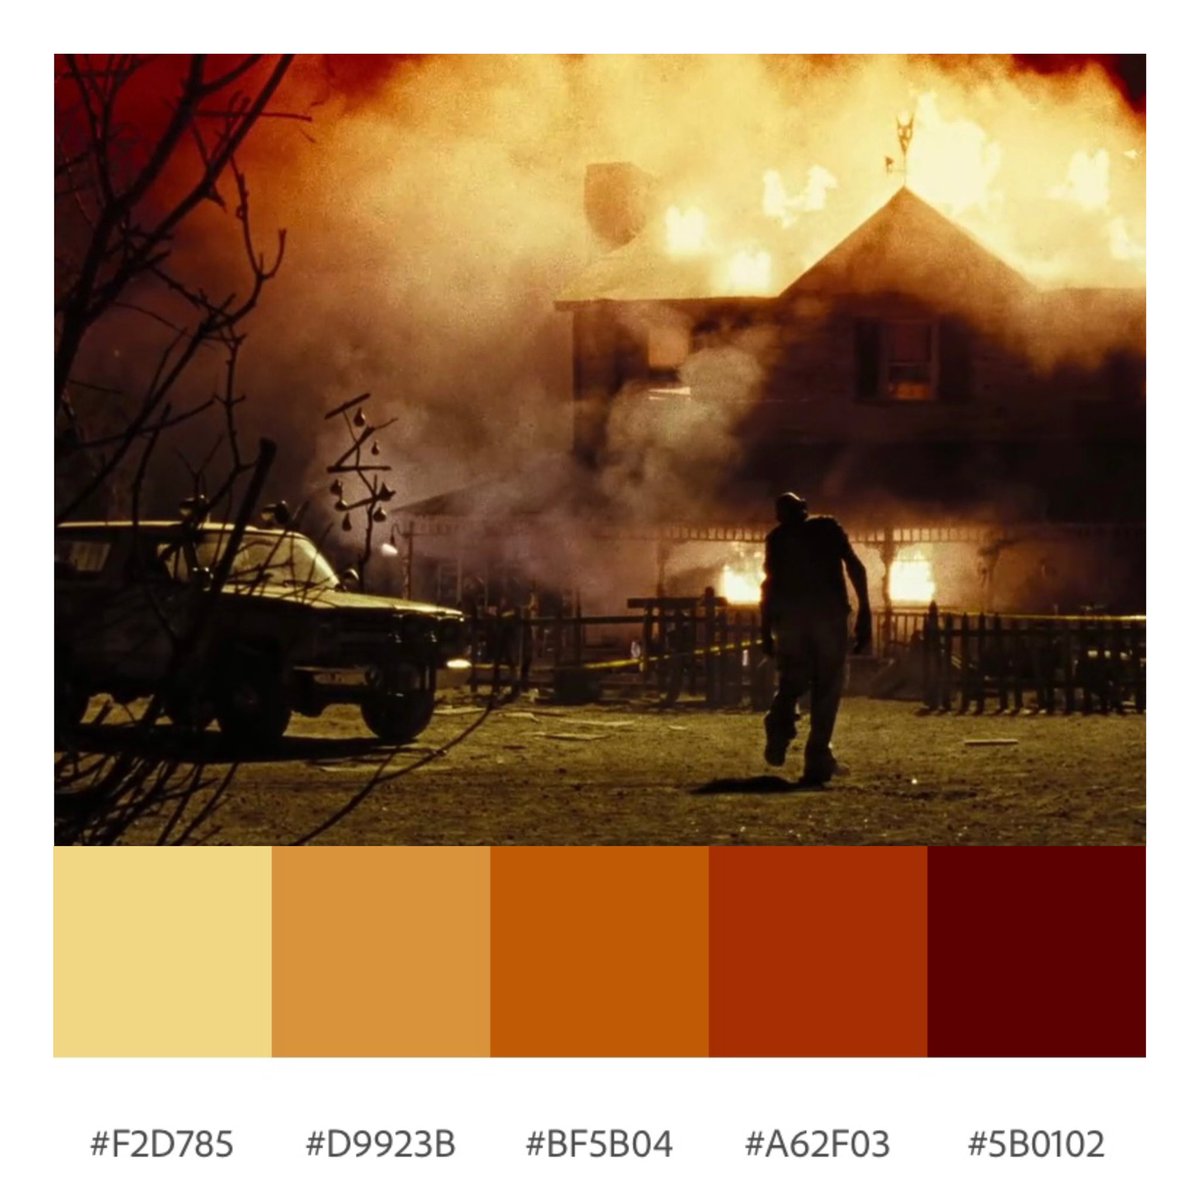 ✨The Devil's Rejects (Rob Zombie, 2005)

#film #movies #filmmaking #cinema #cinephile #cinematography #shots #aesthetic #streaming #theatre #art #artist #color #colorpalette #palette #colourpalette #photography #thedevilsrejects #robzombie #horror #crime #entertainment